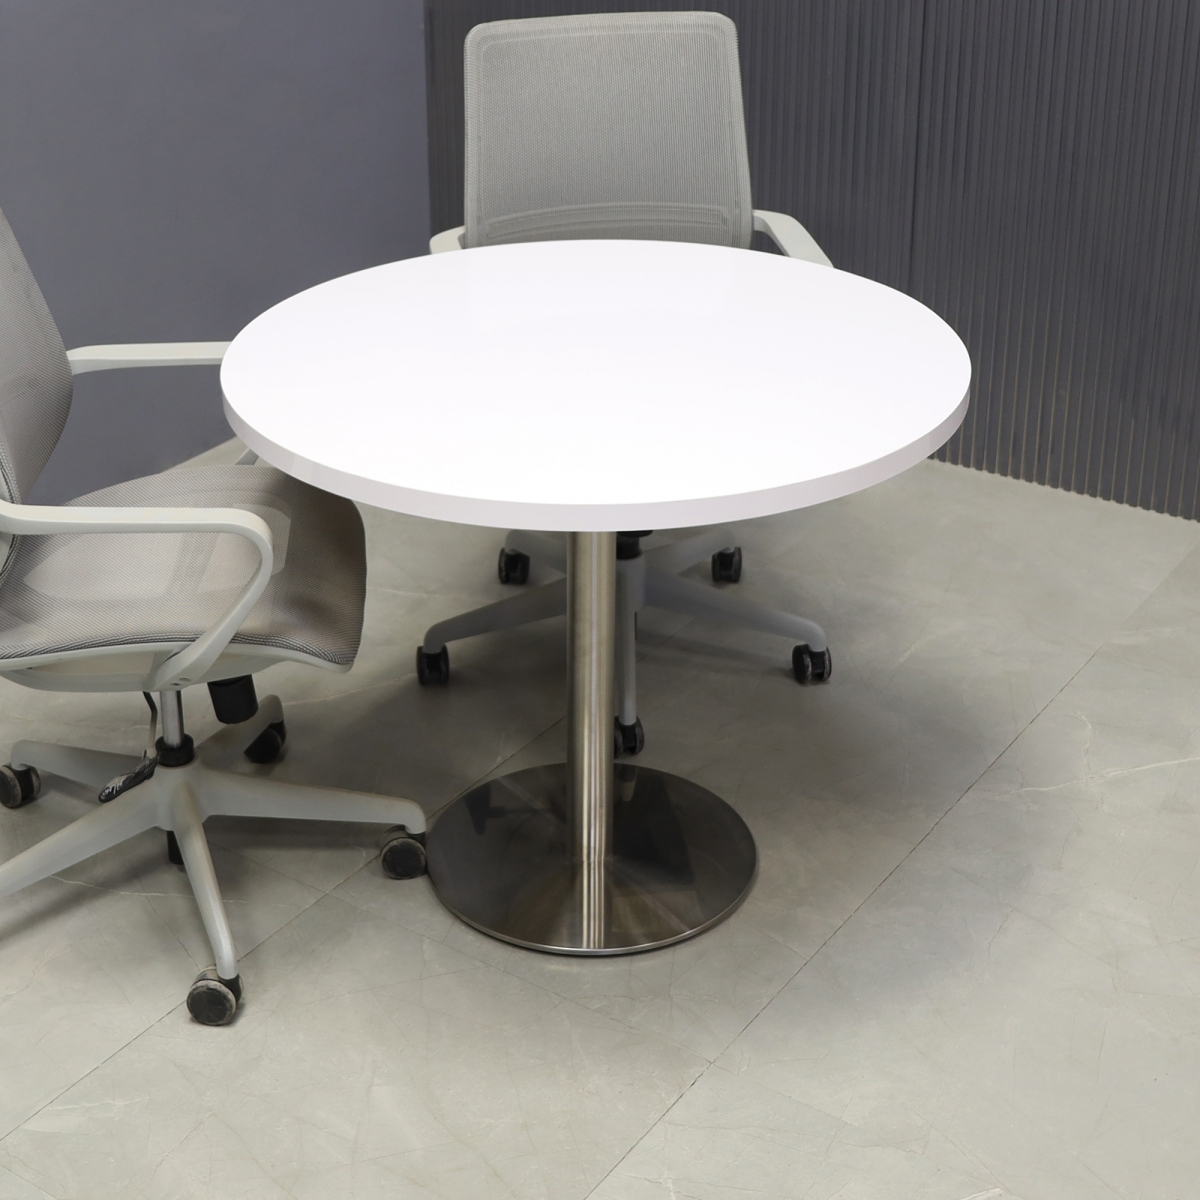 California Round Conference/Cafeteria Table in White Gloss Laminate Top - 36 In. - Stock #68